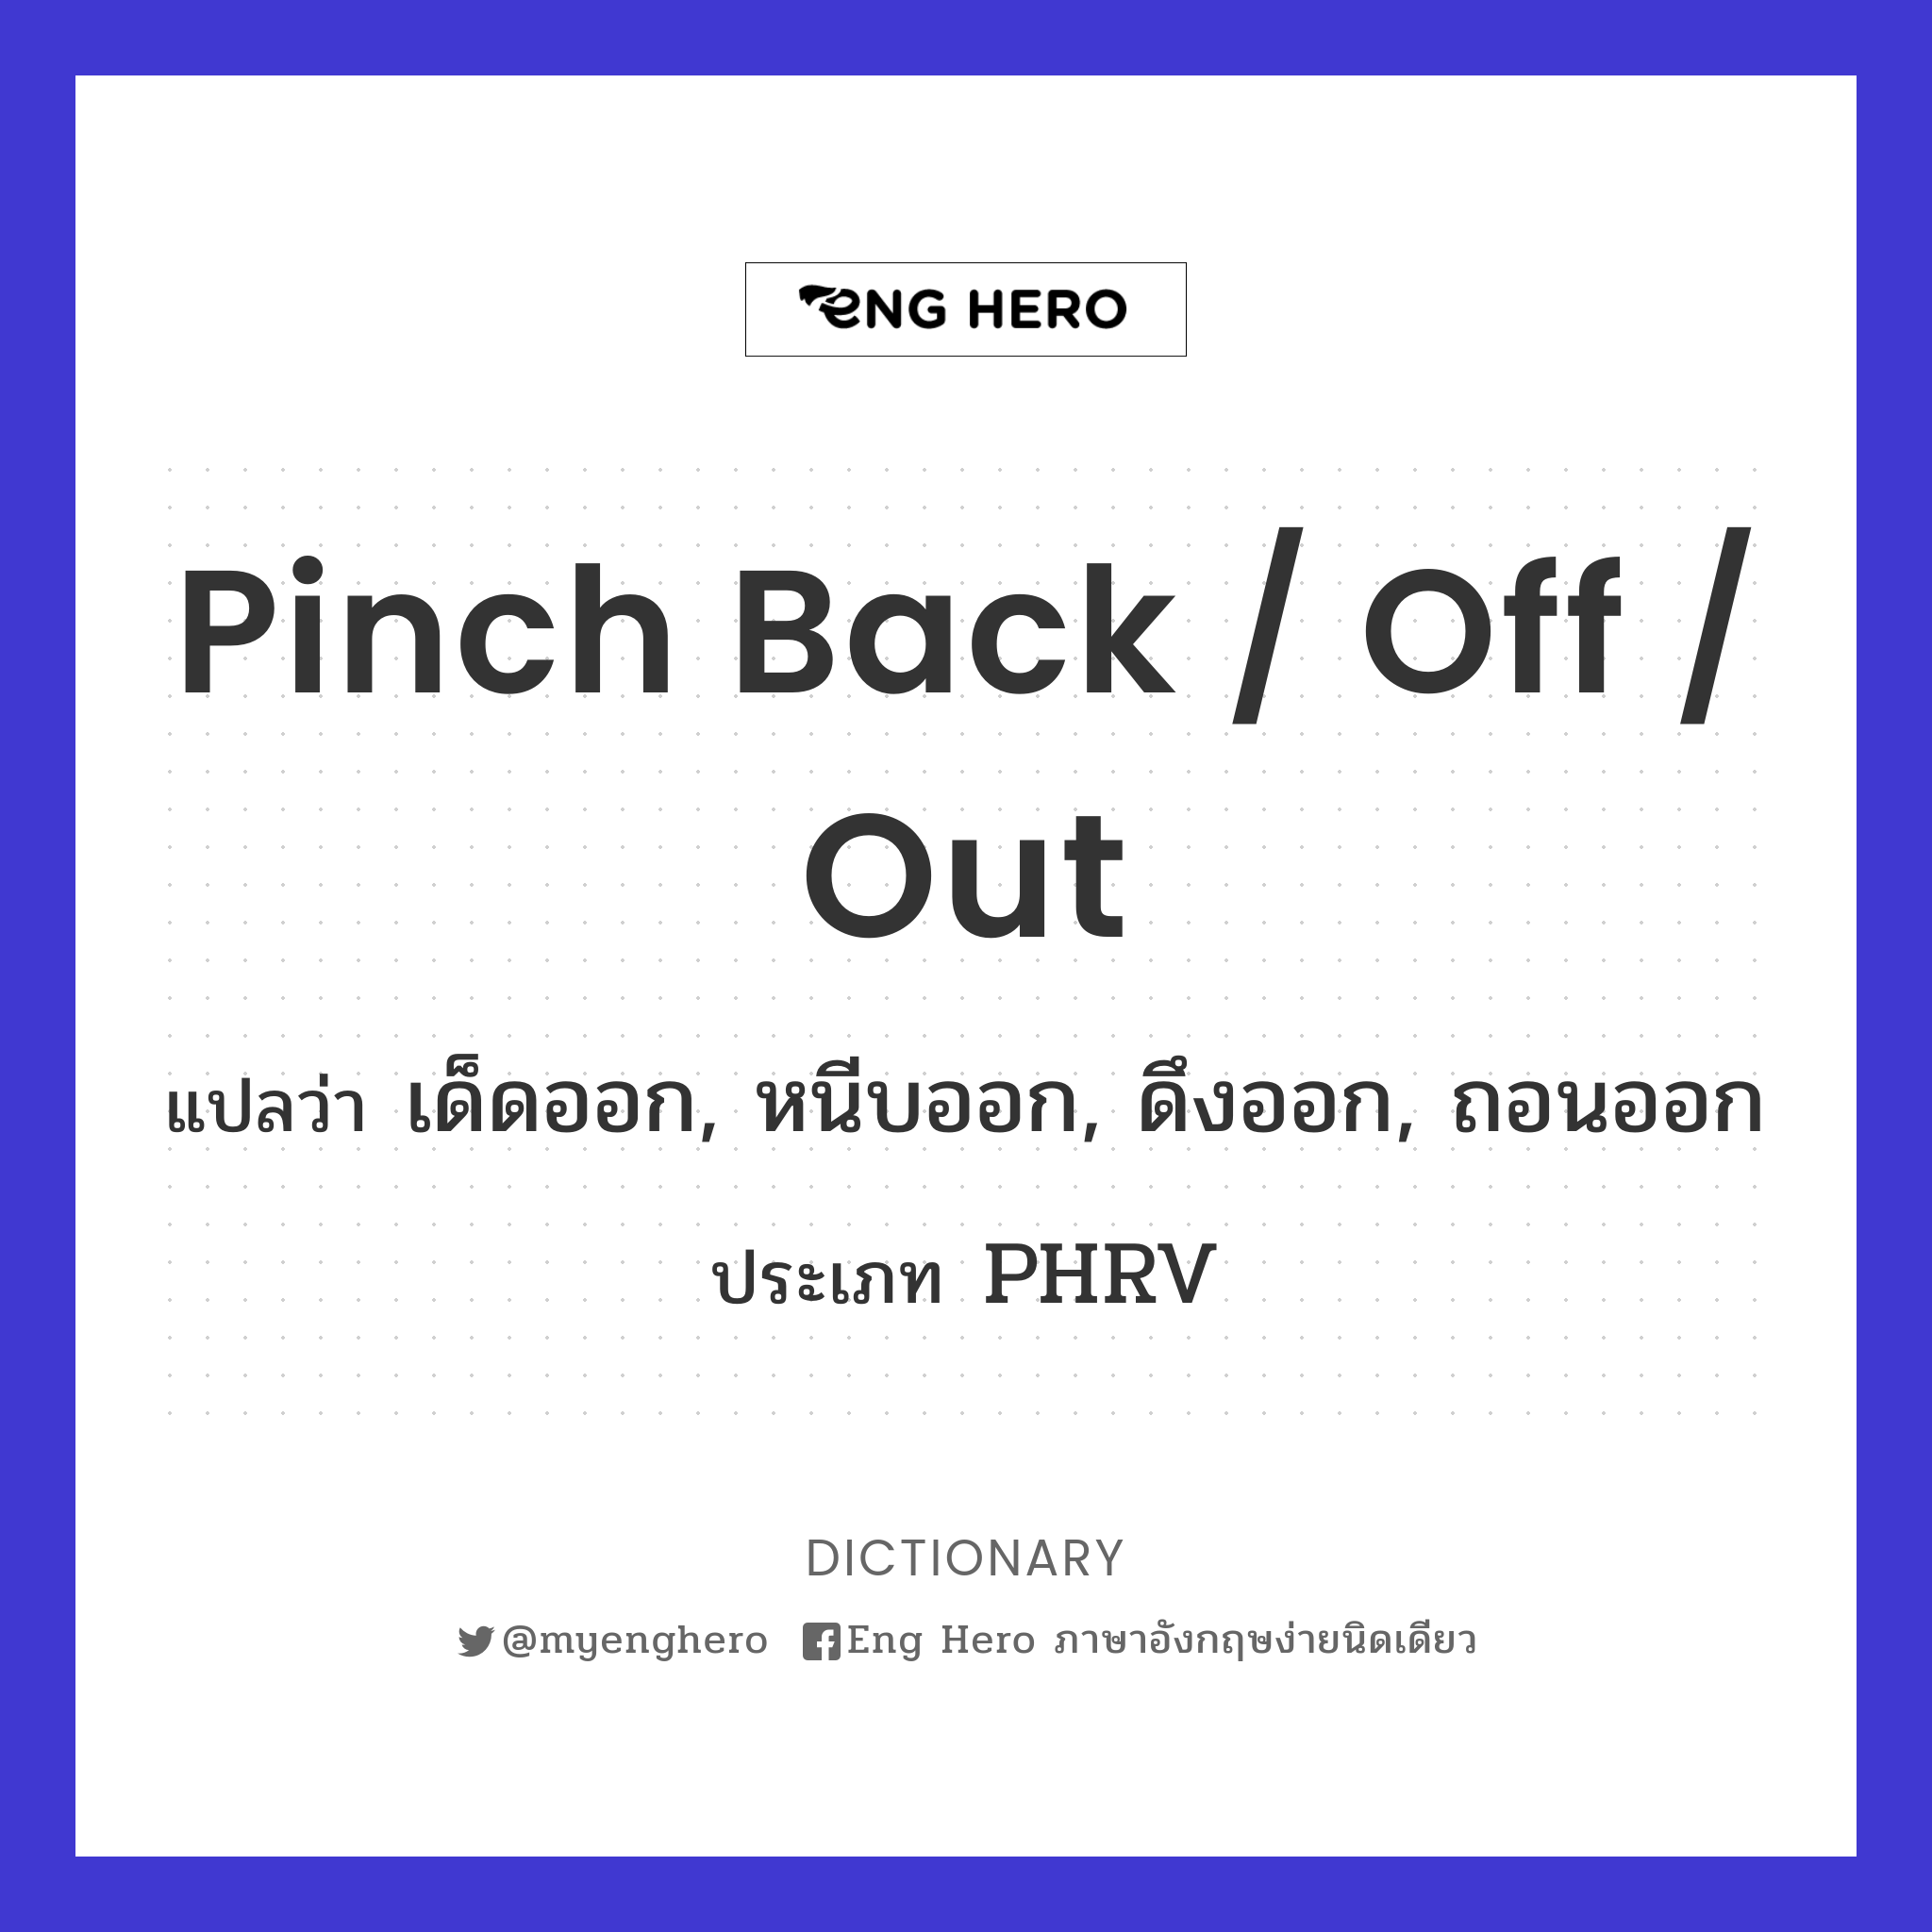 pinch back / off / out